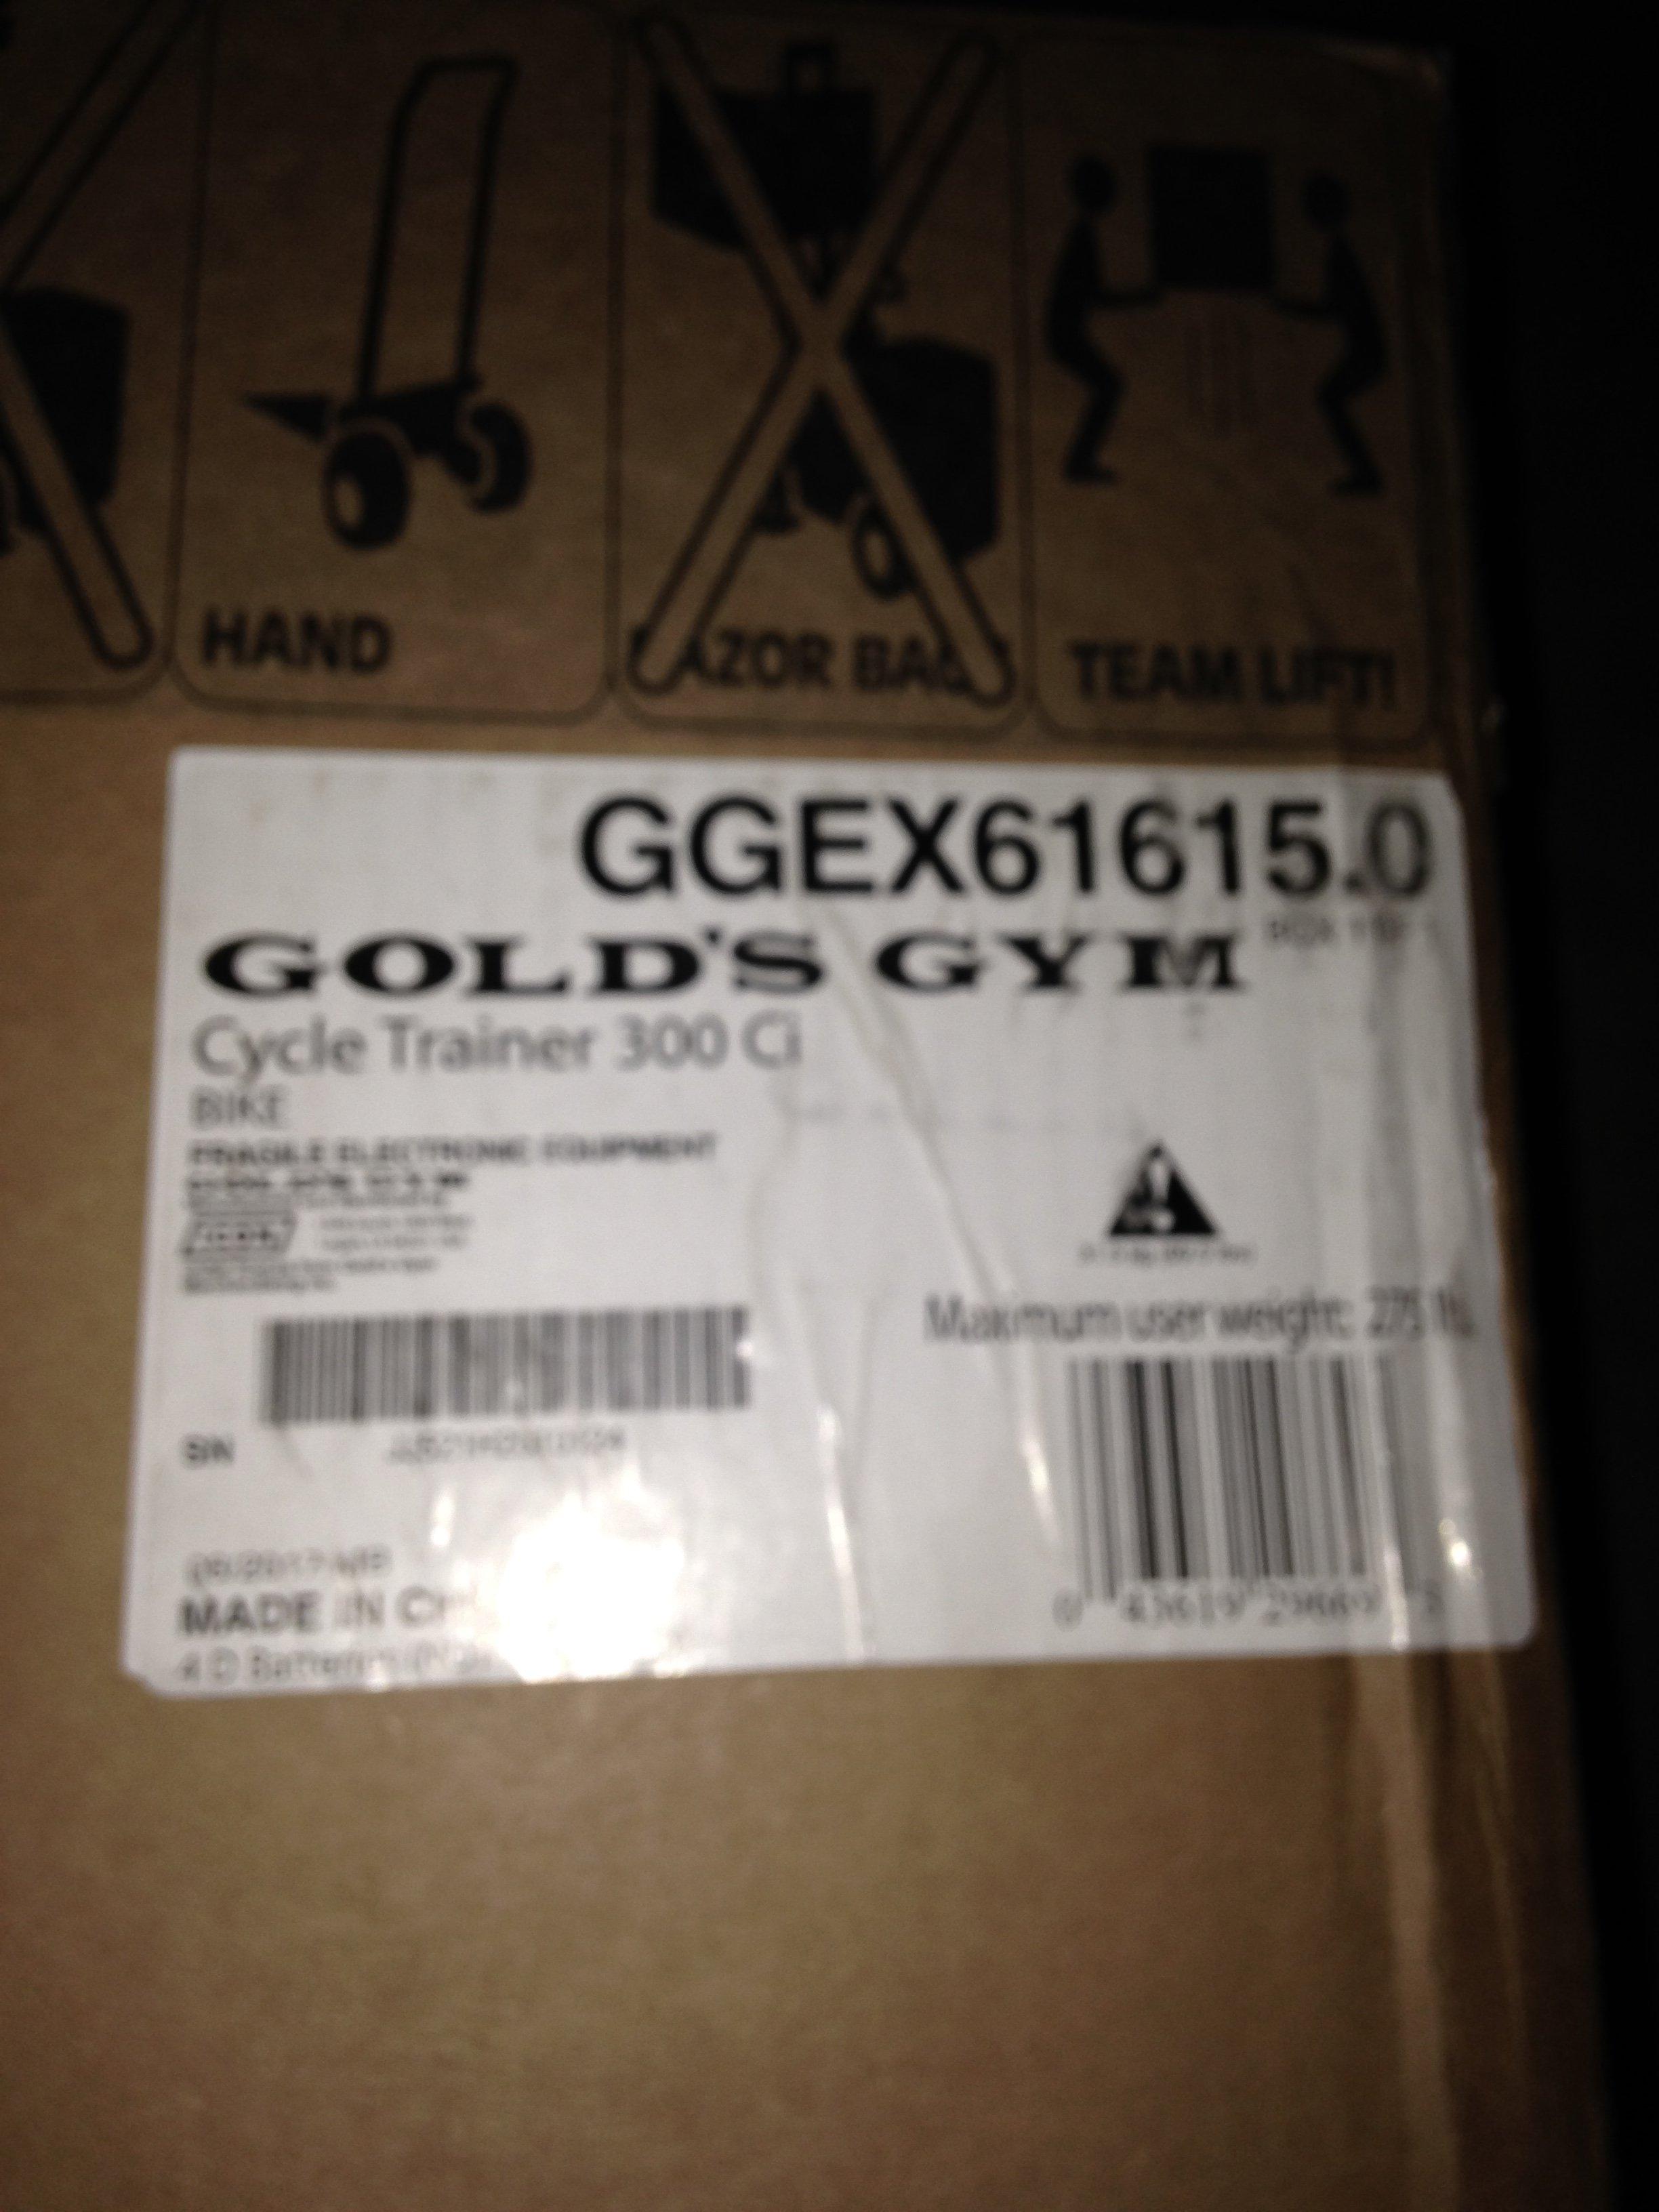 GOLD S GYM CYCLE TRAINER 300 CI GGEX61615 Appears new in box- unassembled